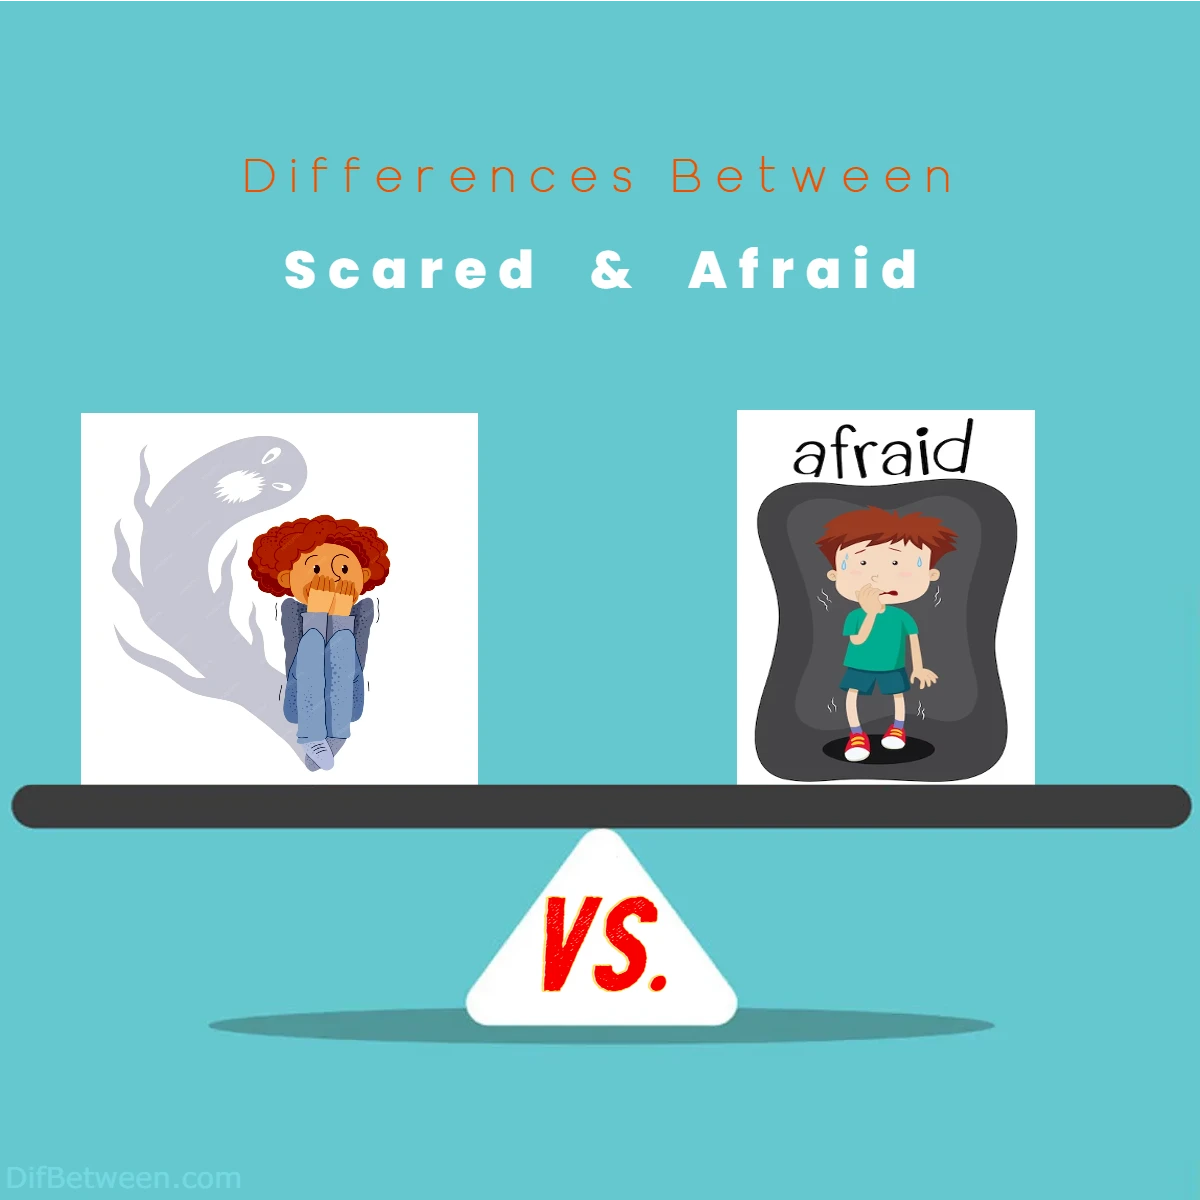 Differences Between Scared vs Afraid